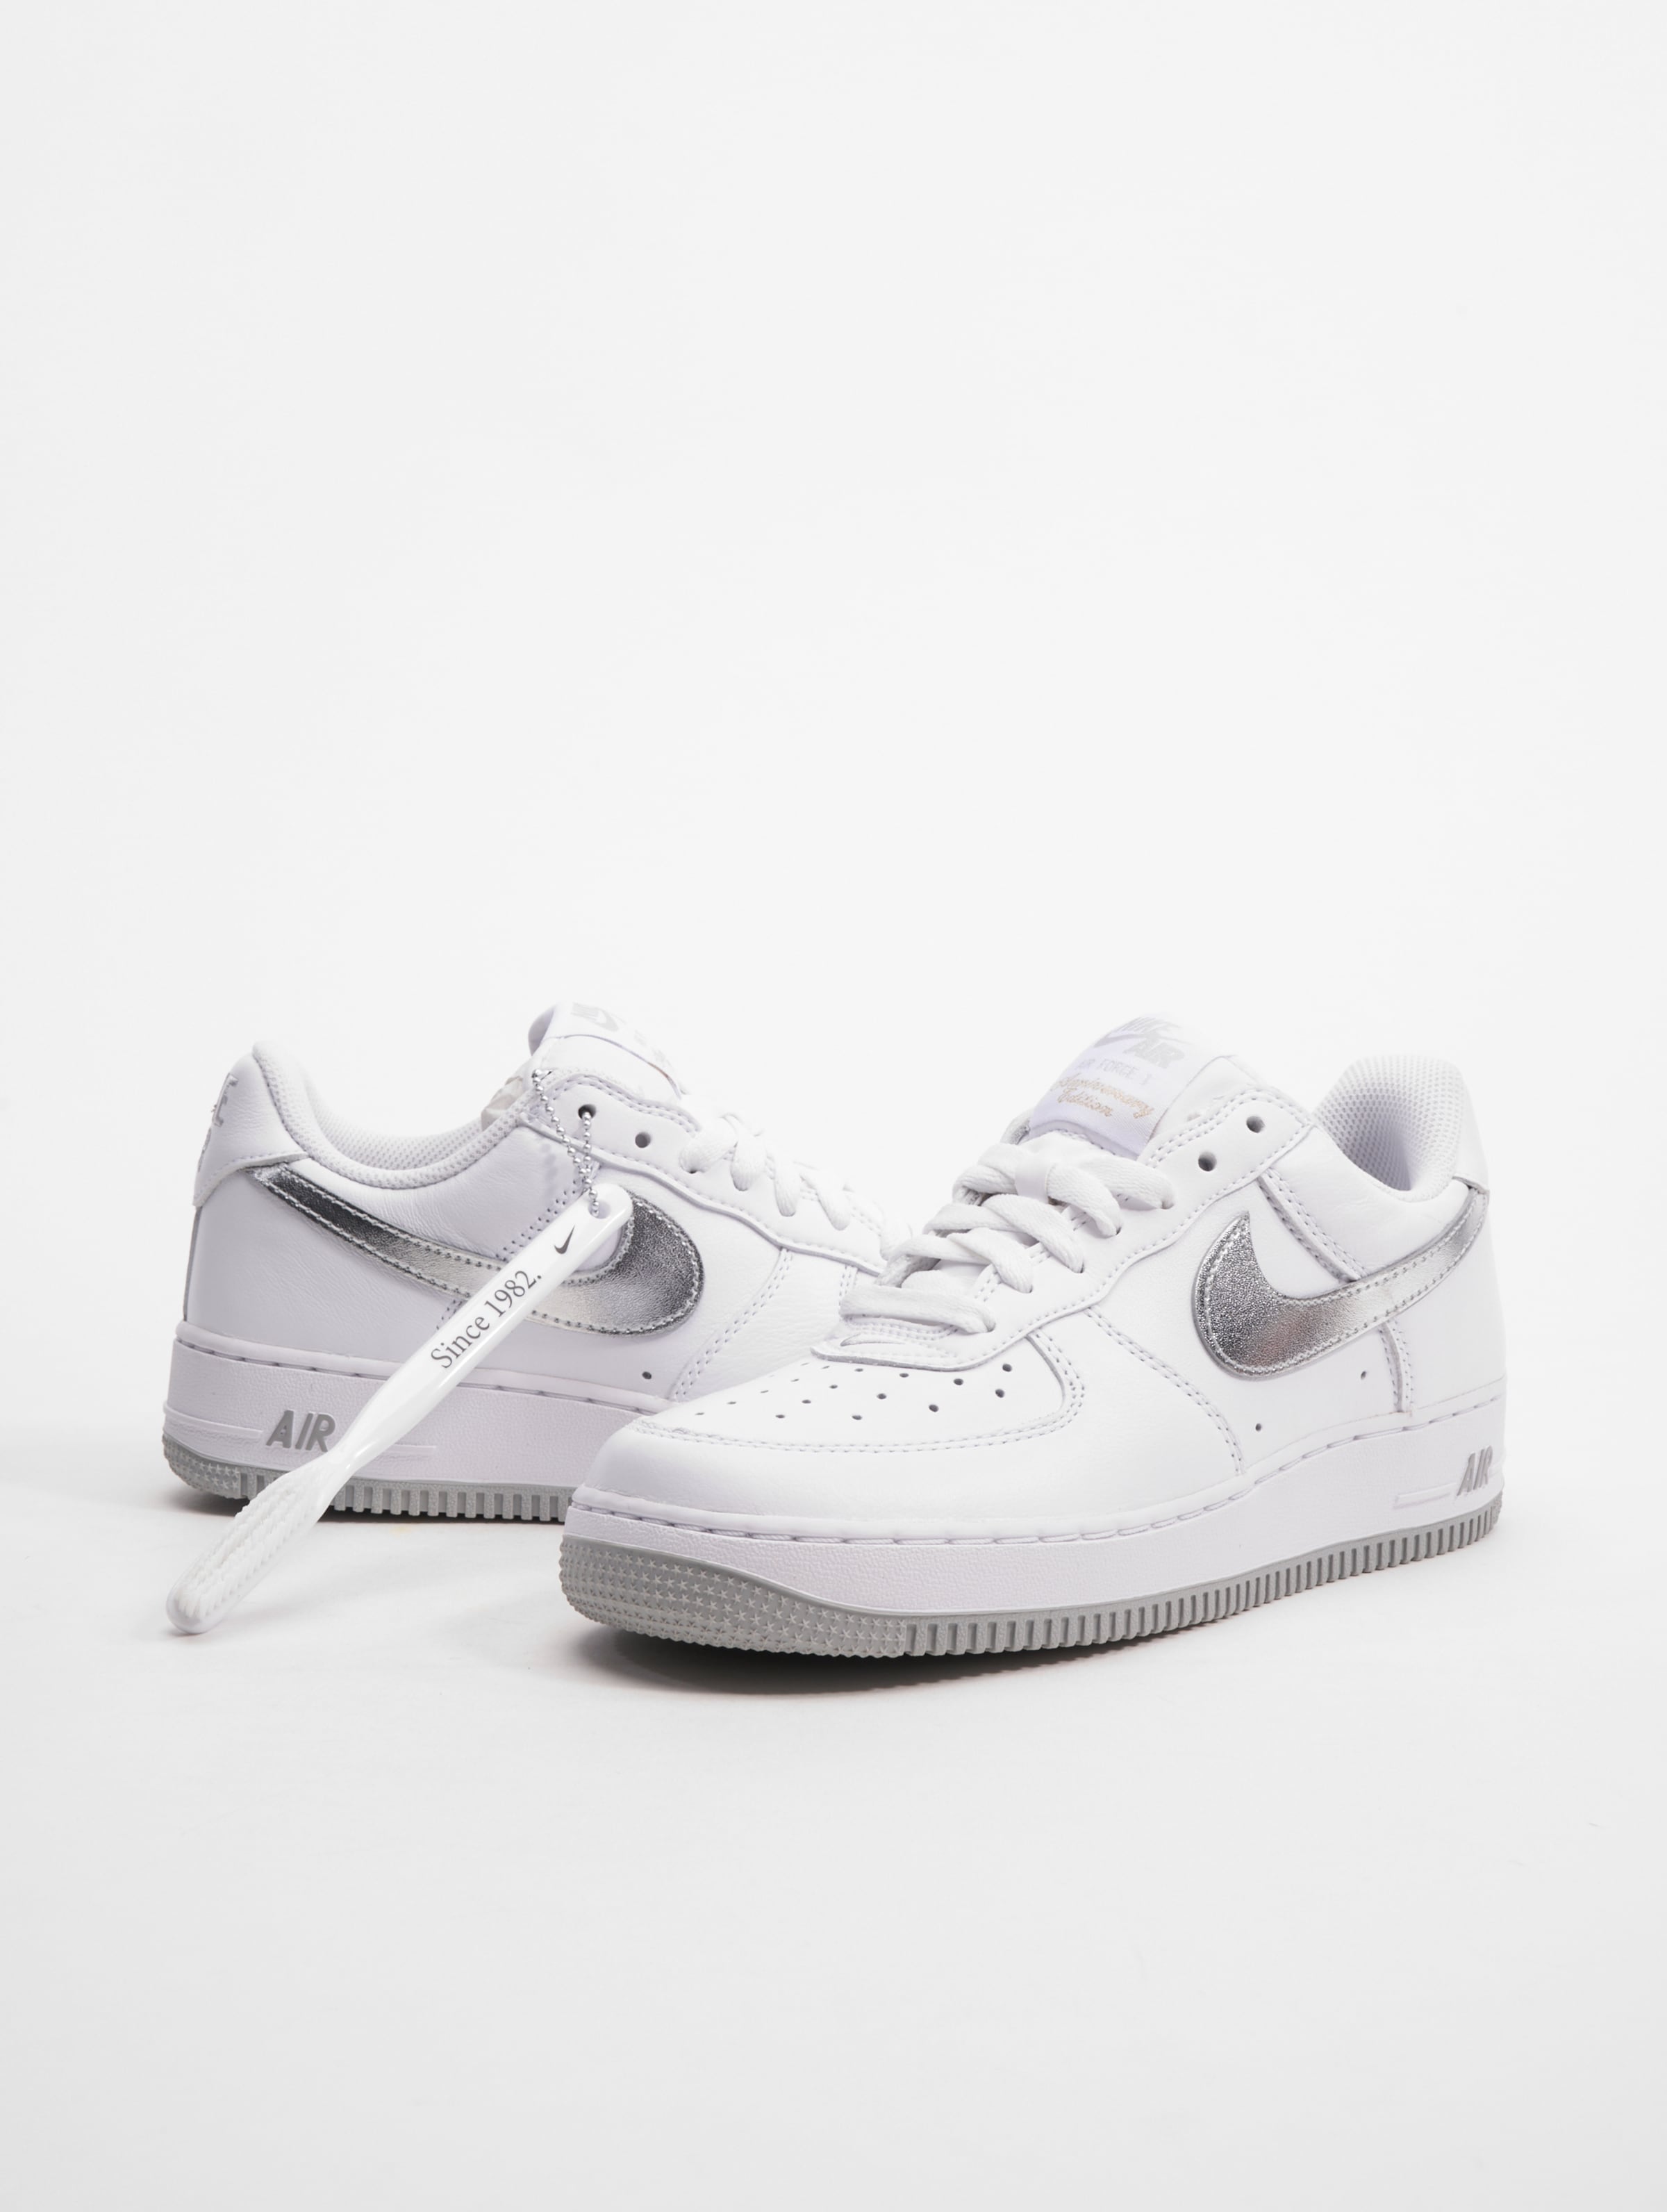 Nike Air Force 1 '07 Low Color of the Month White Metallic Silver DZ6755-100 Maat 41 WIT Schoenen